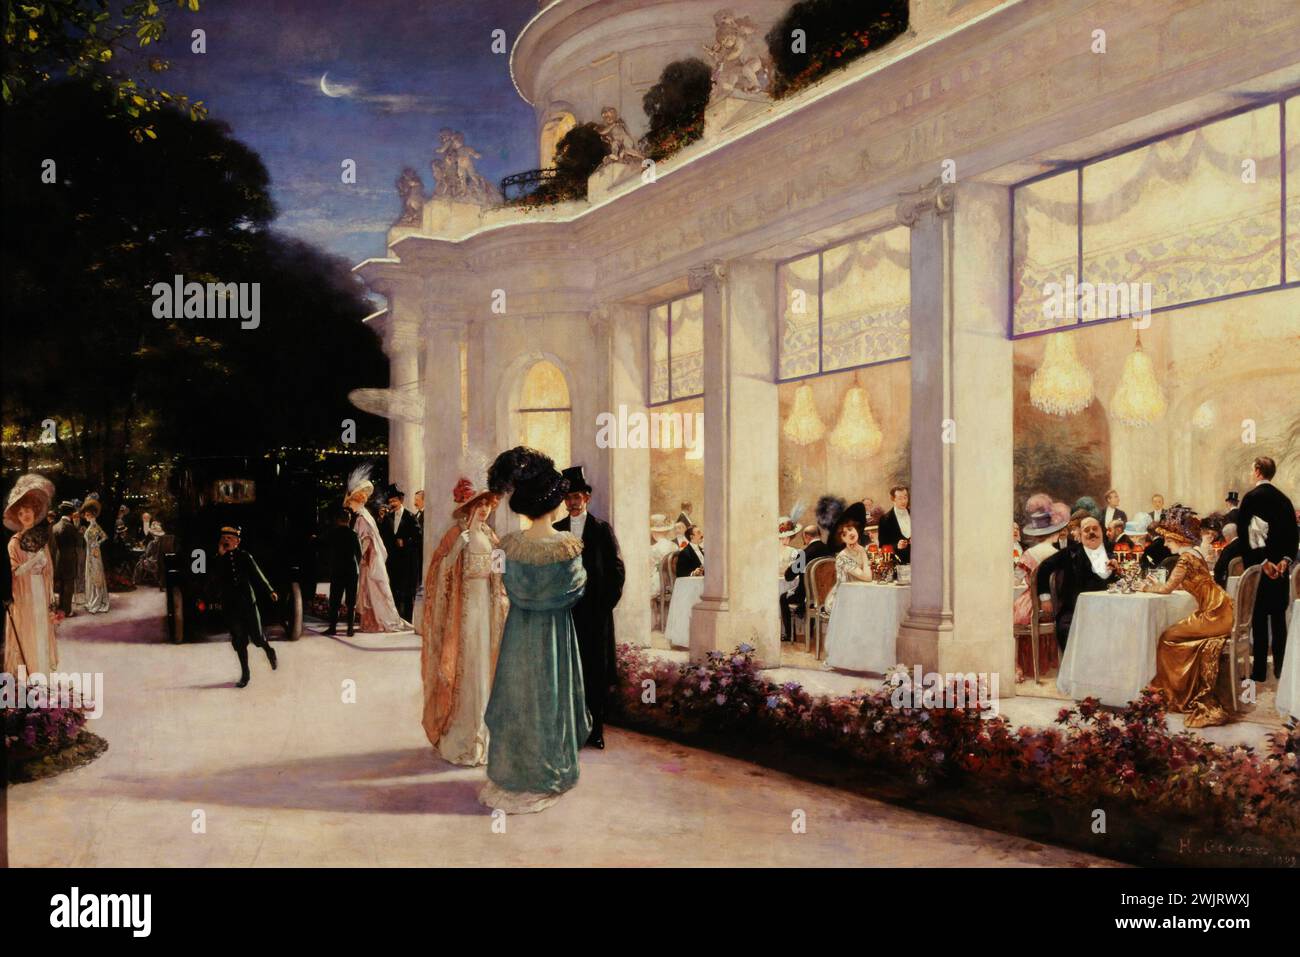 Henri Gervex (1852-1929). 'An evening at Pre-Catelan'. Oil on canvas, 1909. (Outside, Anna Gould and Hélie de Talleyrand-Perigord. Inside, 1st bay, right: Marquis de Dion. Baie in the center: liana de Pougy. Baie on the left: Santos- Dumont). Paris, Carnavalet museum. Academism, year 1900, Academic art, figurative art, attitable, glass bay, building, beautiful time, wood of boulogne, dinner, lighting, elegant, woman, evening habit, man, garden, electric light, luxury, night, work 'Art, pavilion, pre-category, reception, restaurant, restaurant, gourmet, wealth, dining room, life scene, urban sc Stock Photo